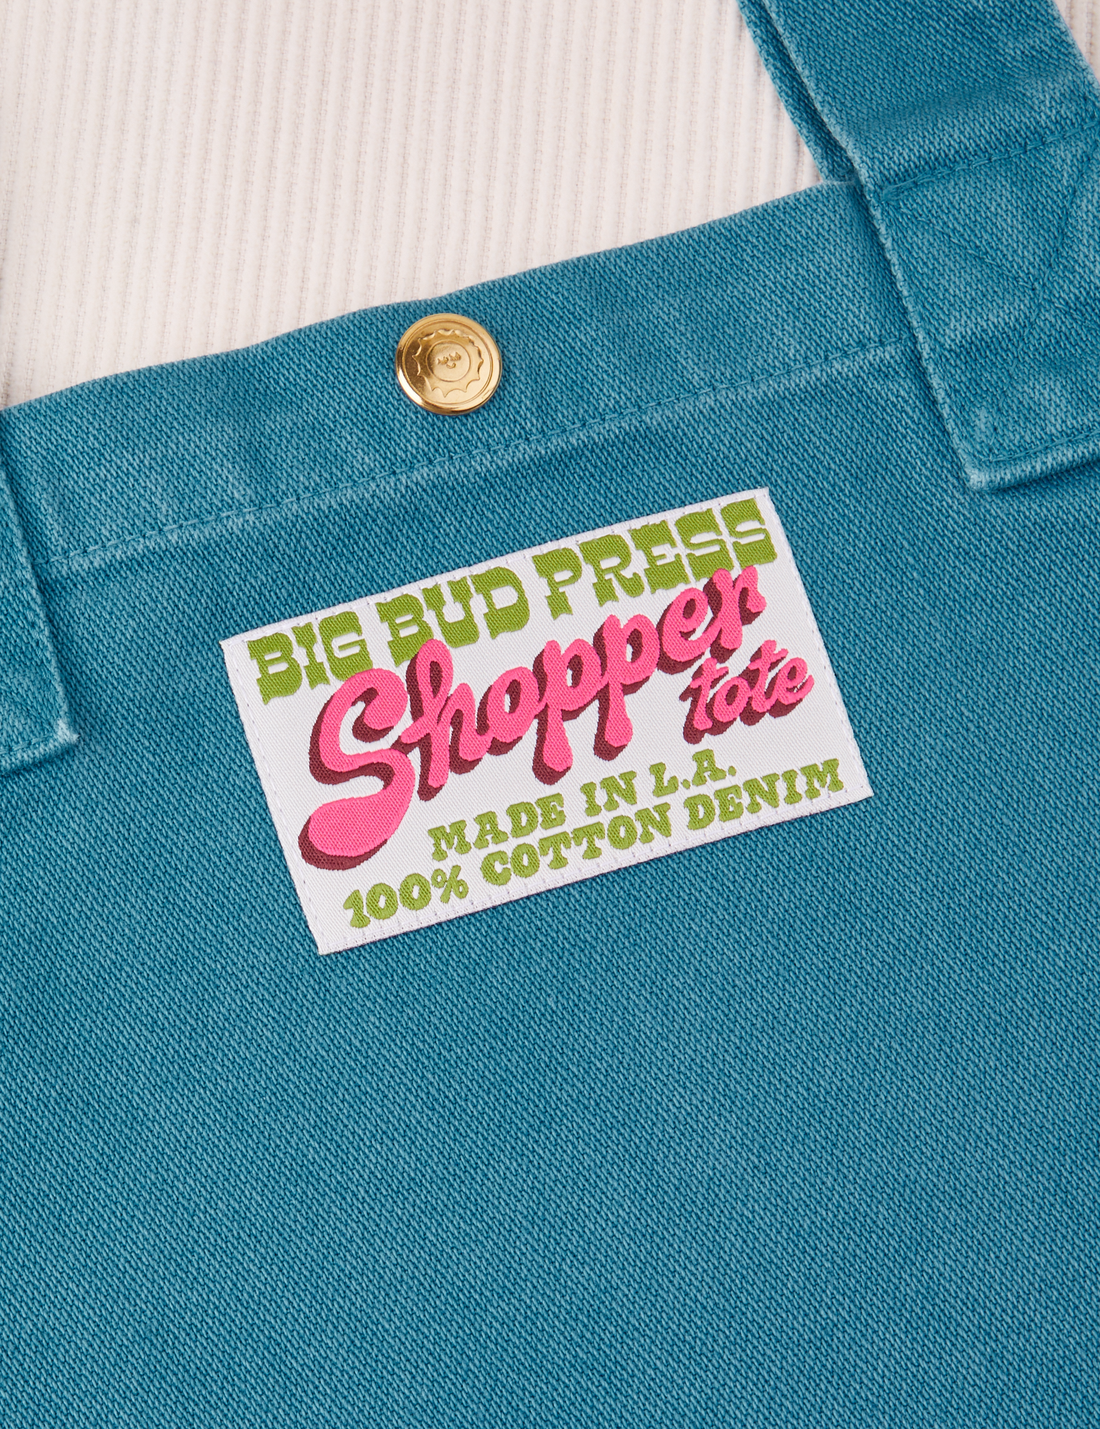 Sun Baby brass snap on Shopper Tote Bag in Marine Blue. Bag label with green and pink text that reads "Big Bud Press Shopper Tote, Made in L.A., 100% Cotton Denim" on white background